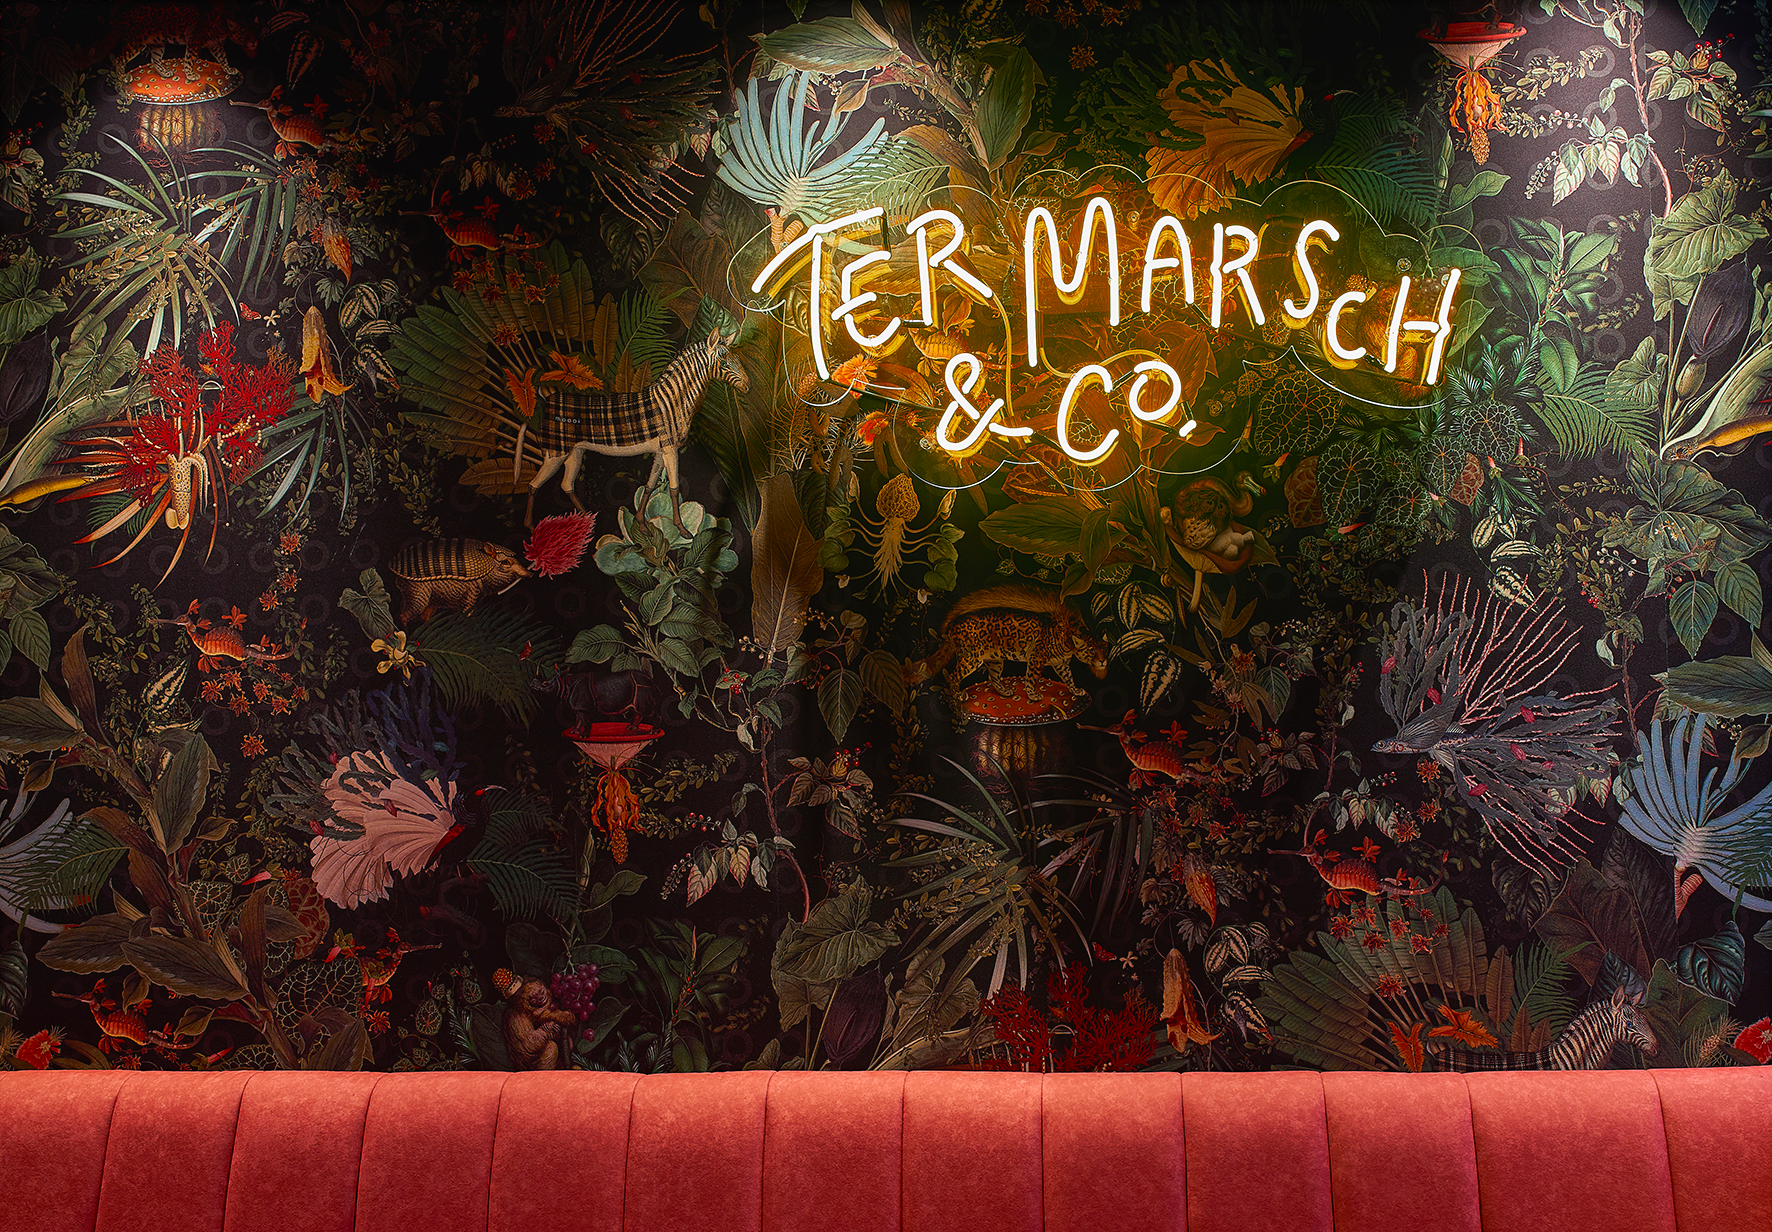 Ter Marsch & Co Amsterdam jaw dropping interior - interior design - crazy look & feel 9.png